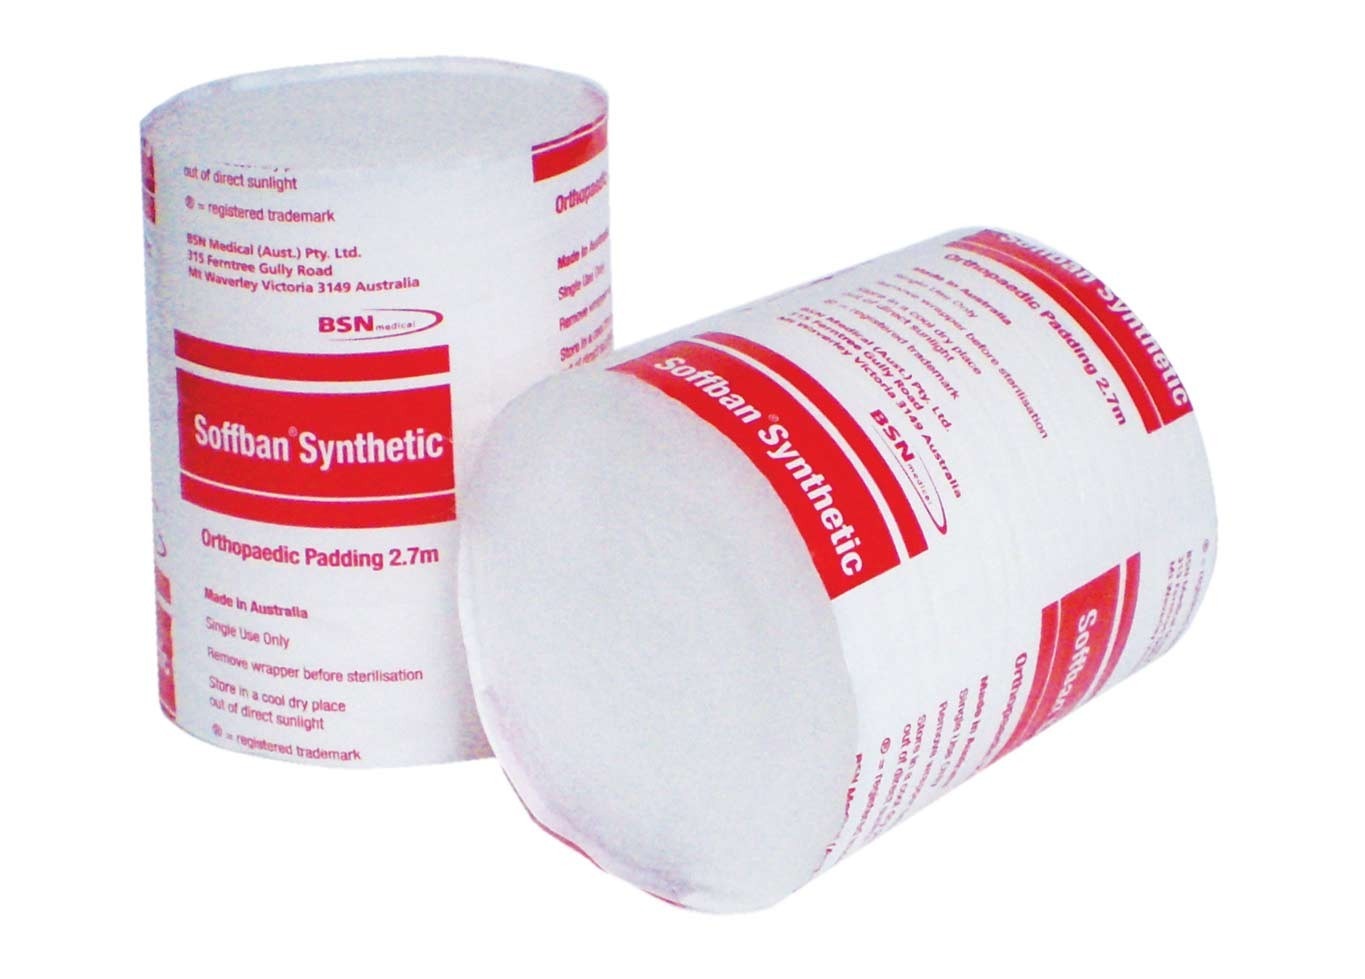 soffban-synthetic-pack-2008